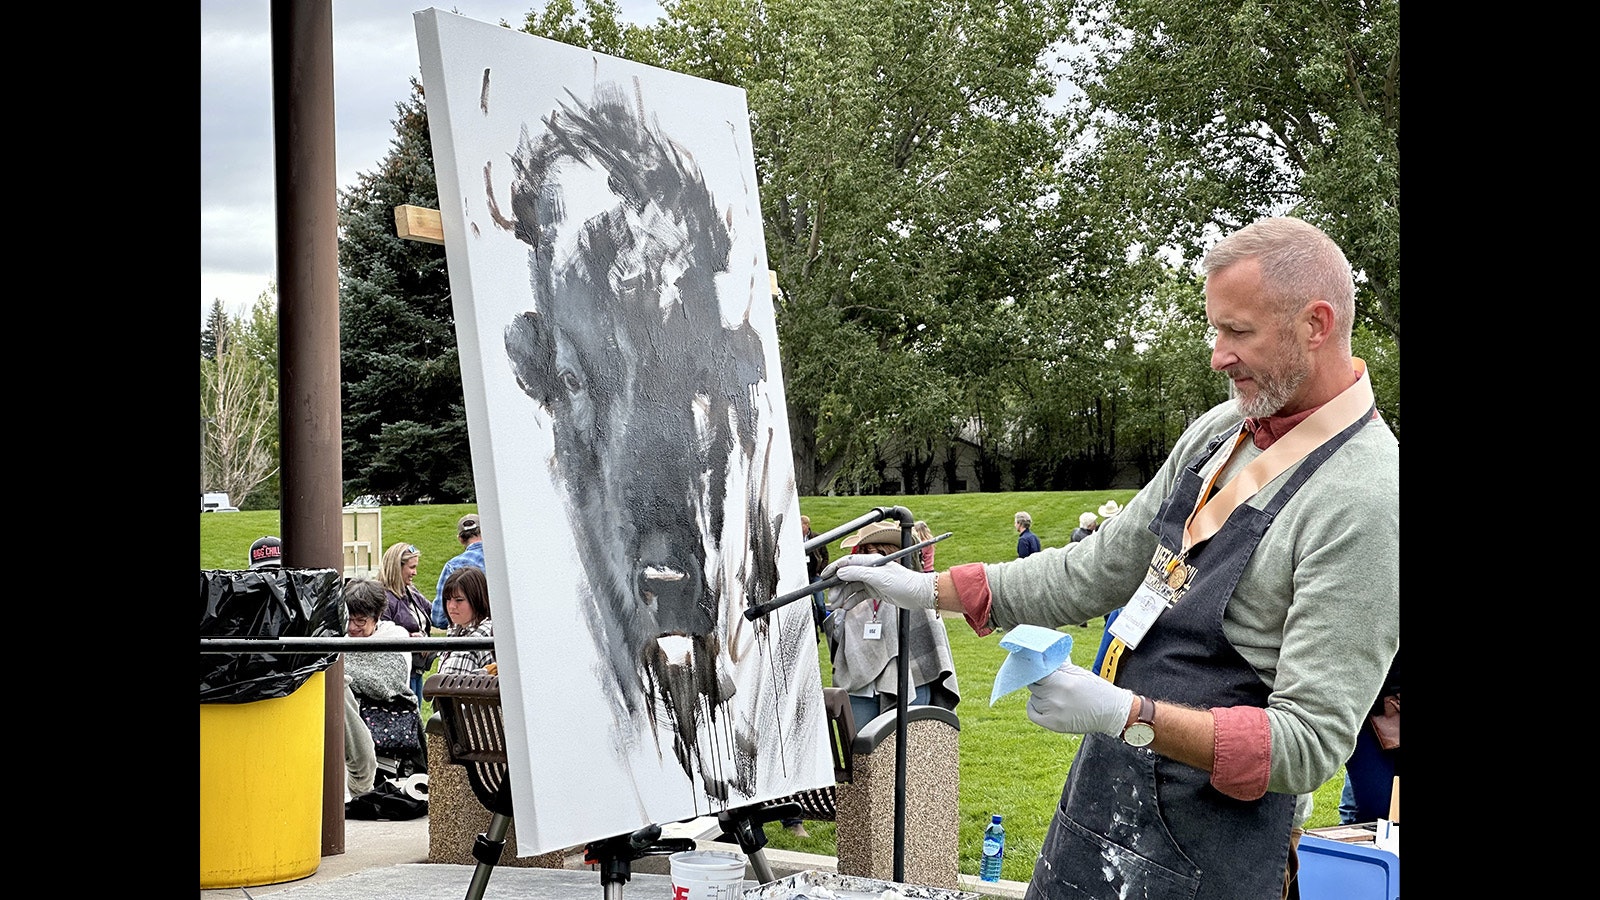 David Frederick Riley paints "American Dream" during the 42nd Buffalo Bill Art Show and Sale Quick Draw. The painting won the People's Choice Award for the Quick Draw and was the highest-selling piece at the morning's live auction.